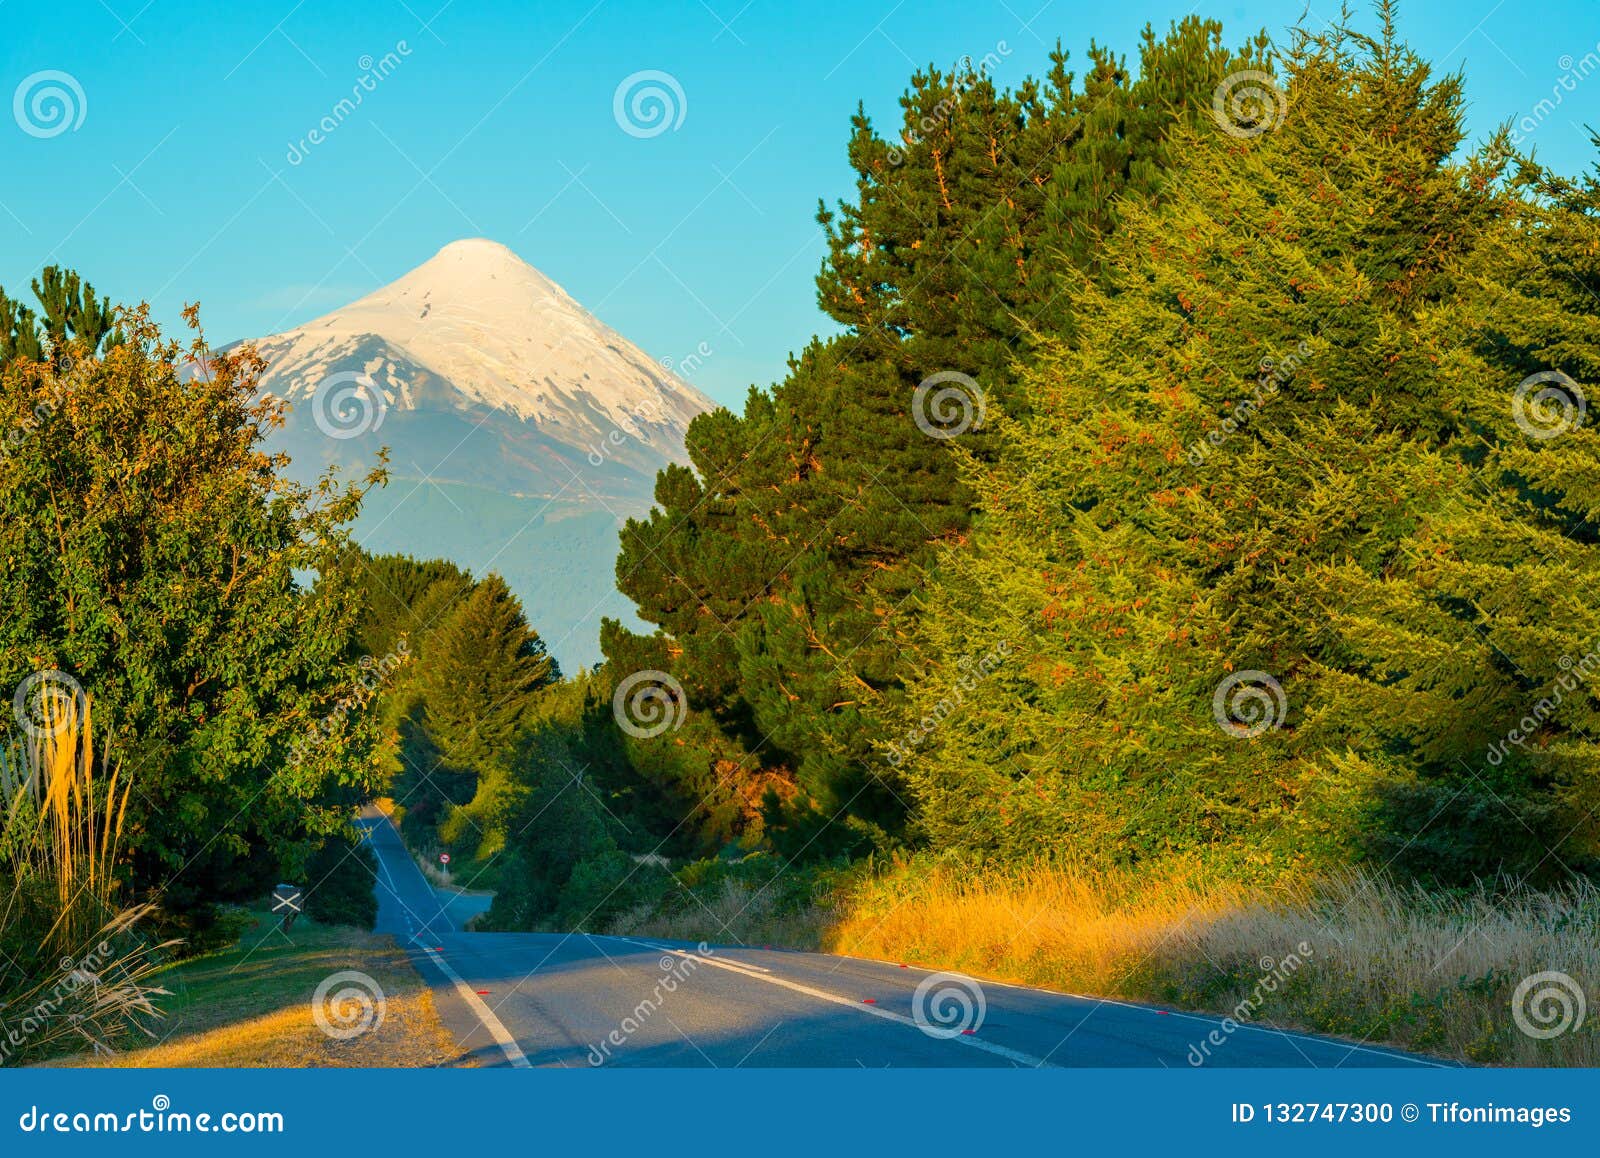 road between puerto varas and ensenada at the shores of lake llanquihue with the osorno volcano in the back